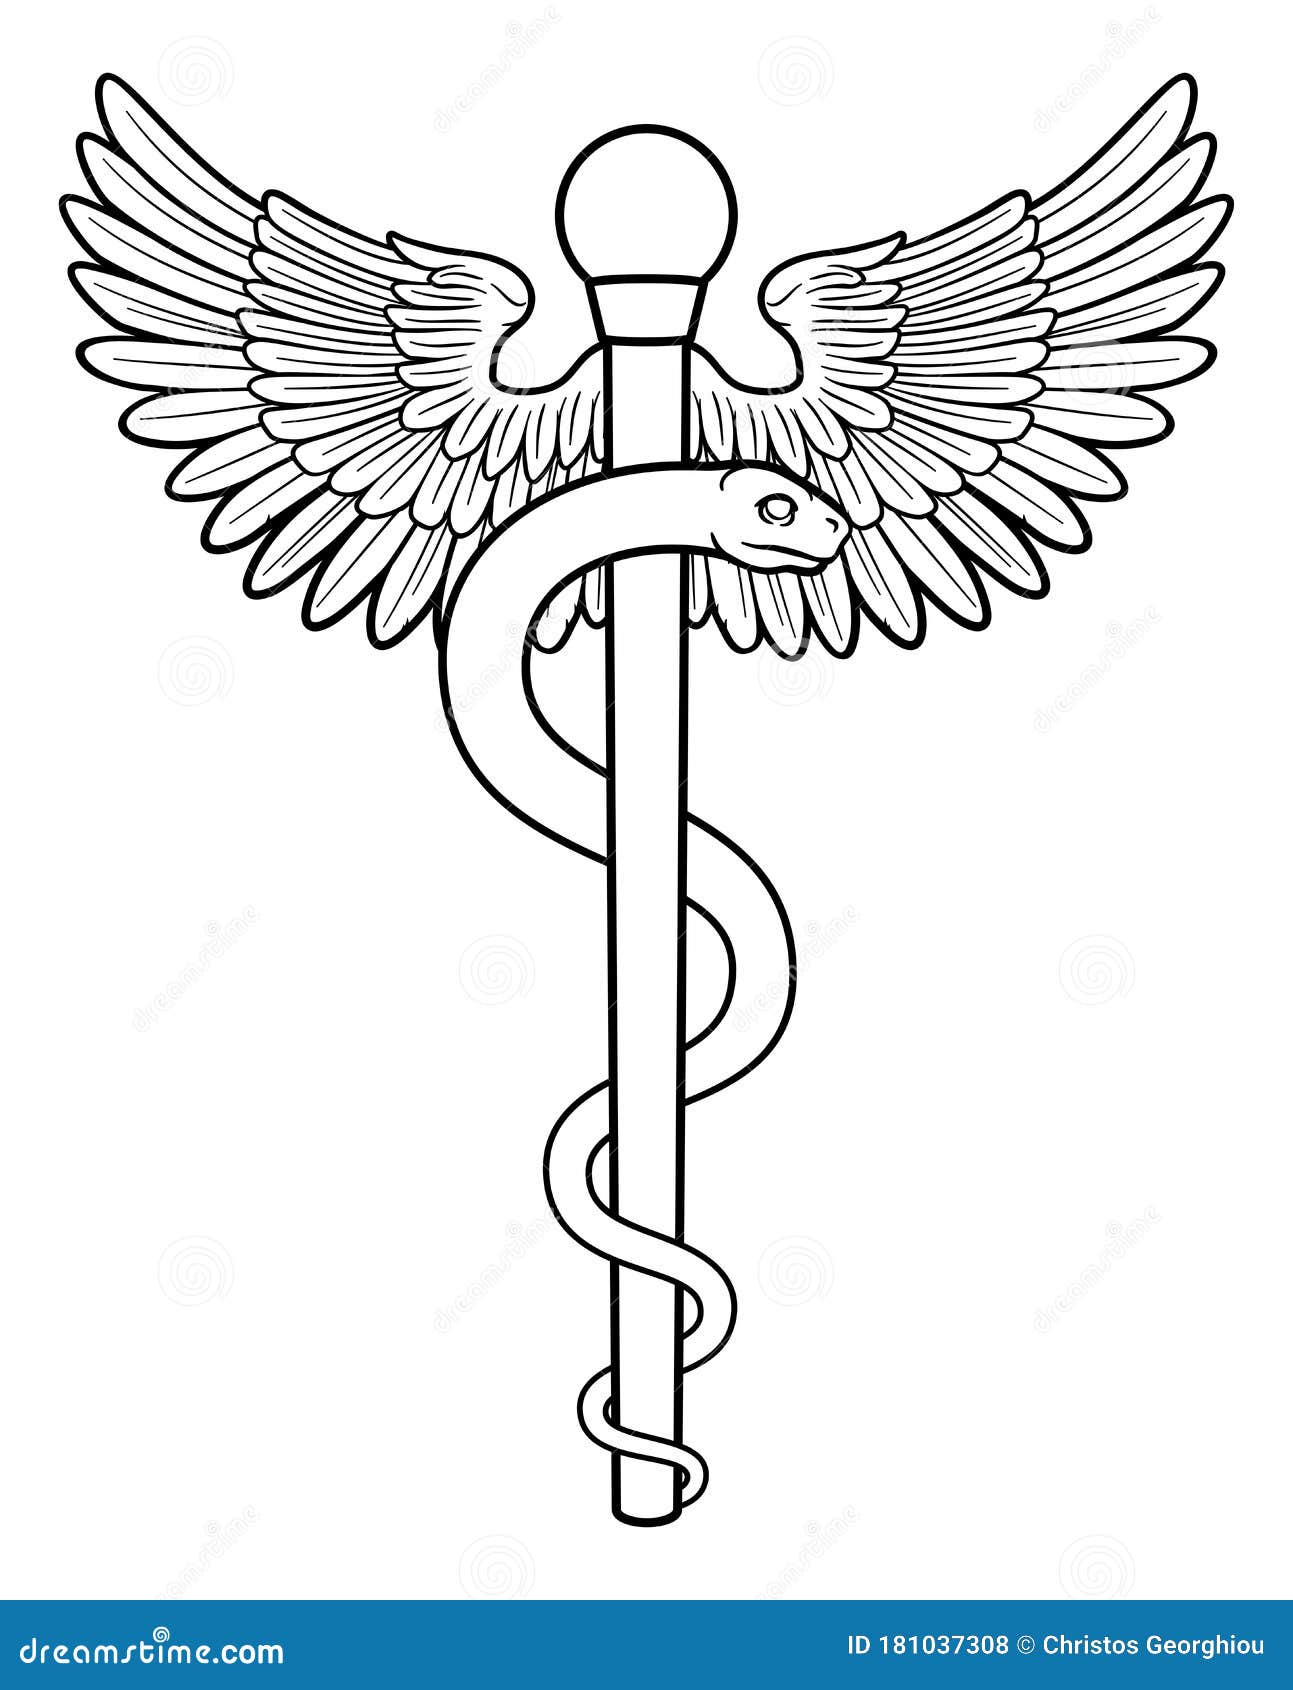 Rod of Asclepius Aesculapius Medical Symbol Stock Vector - Illustration of  design, emblem: 181037308